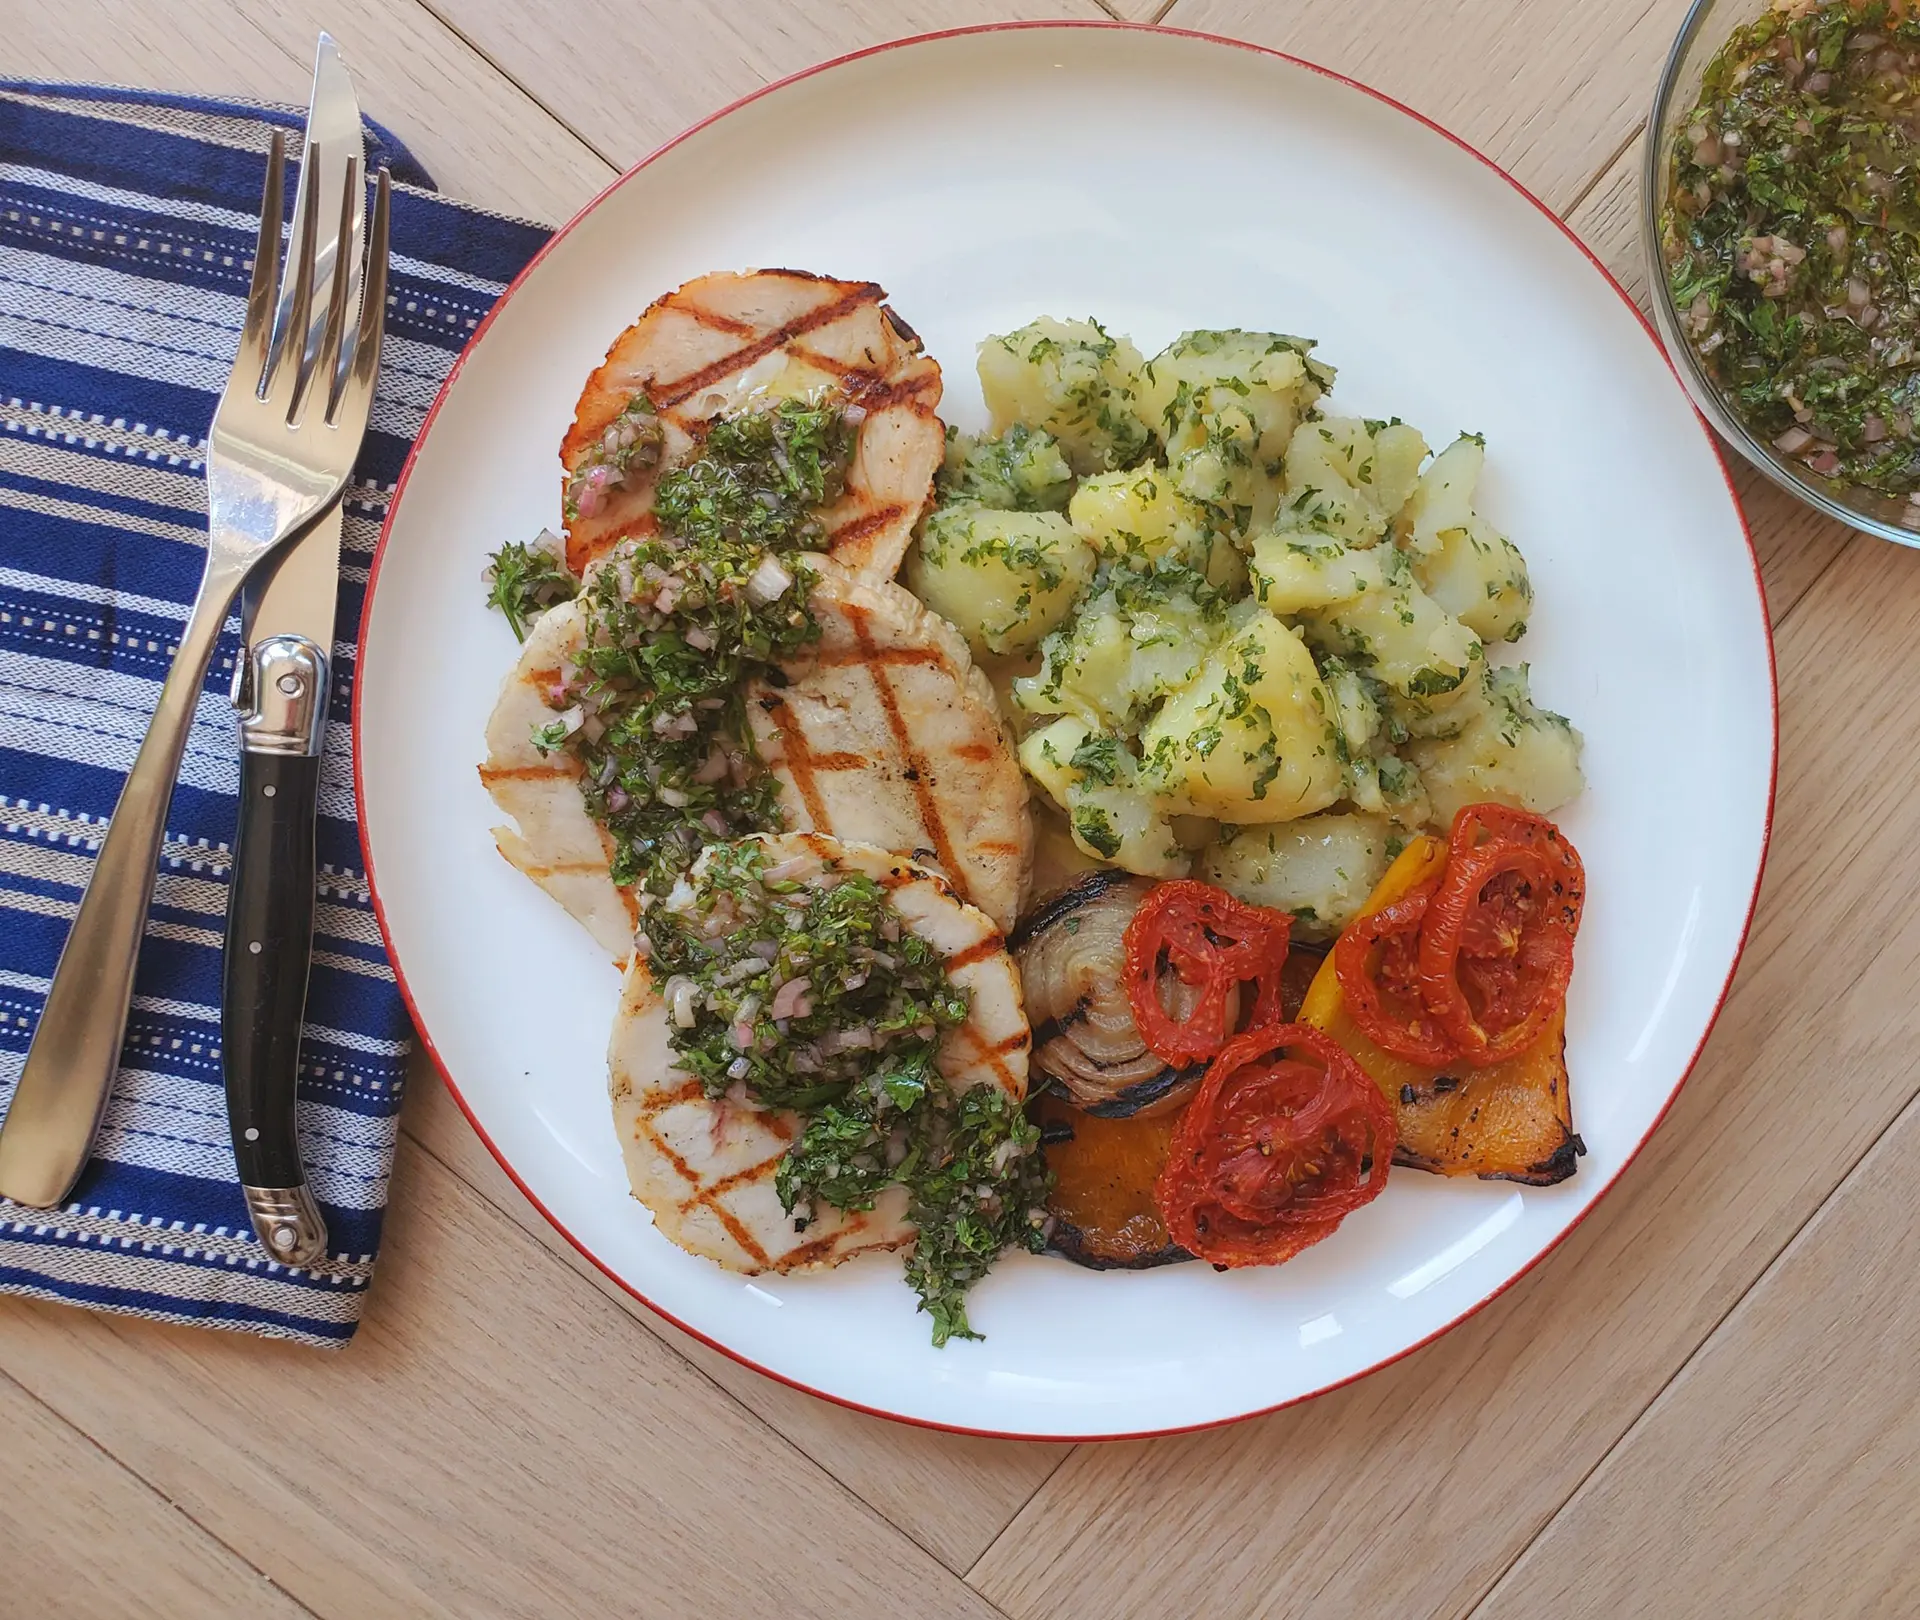 Turkey steaks with chimichurri sauce, grilled vegetables and potatoes.